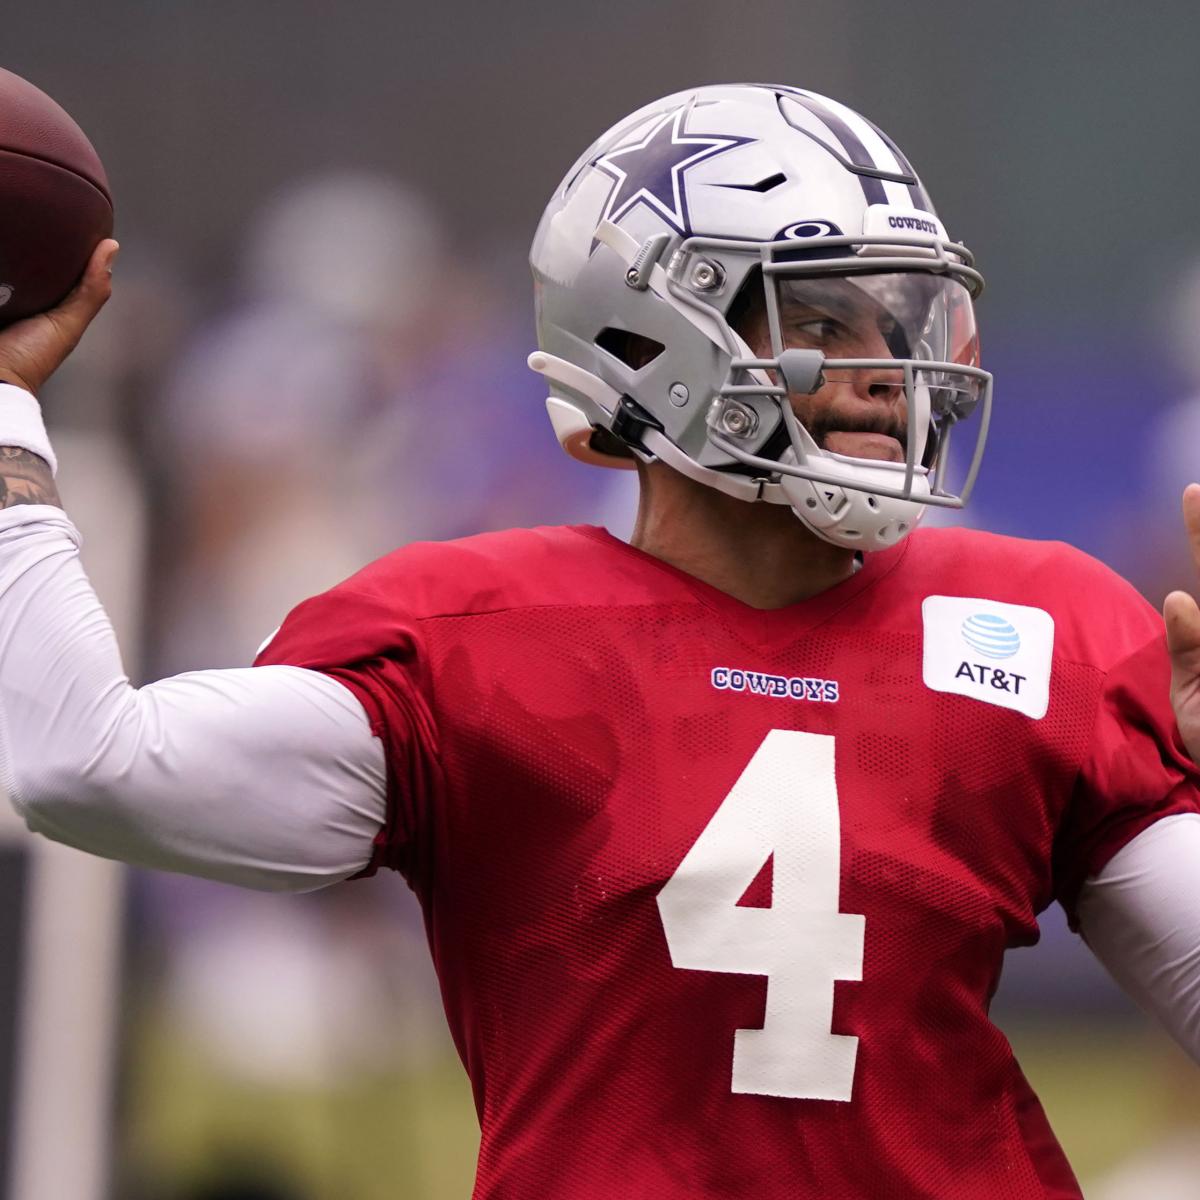 Dak Prescott Says He Plans to Finish Career with Cowboys Amid Contract Talks | Bleacher Report